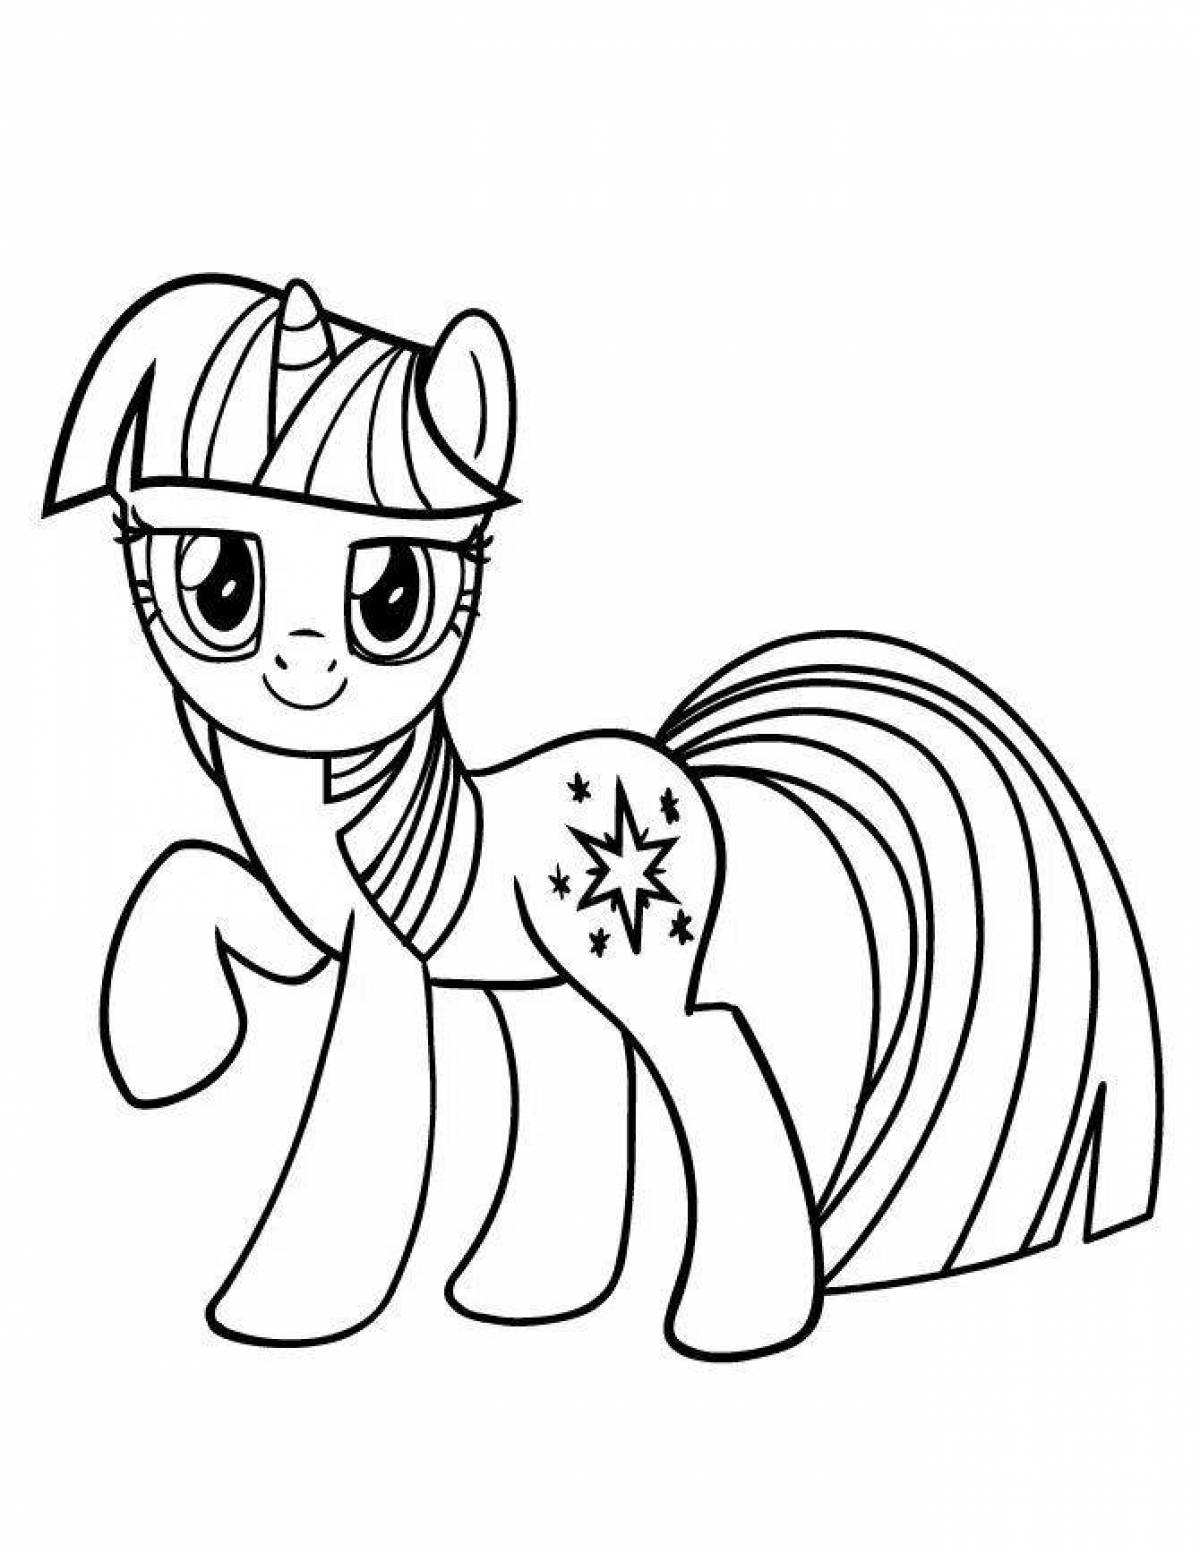 Majestic Twilight Sparkle Coloring Page